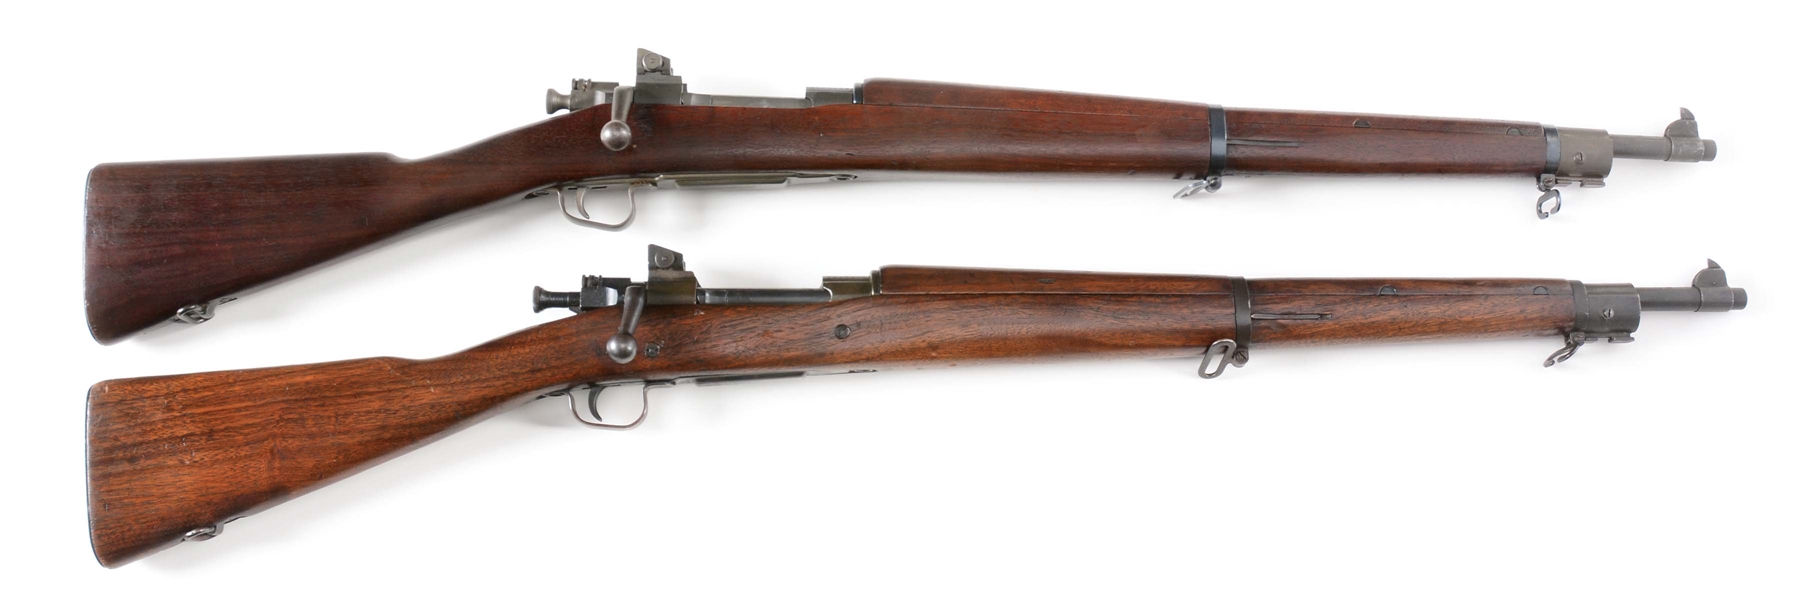 (C) LOT OF TWO: SMITH-CORONA AND REMINGTON 03-A3 BOLT ACTION RIFLES.